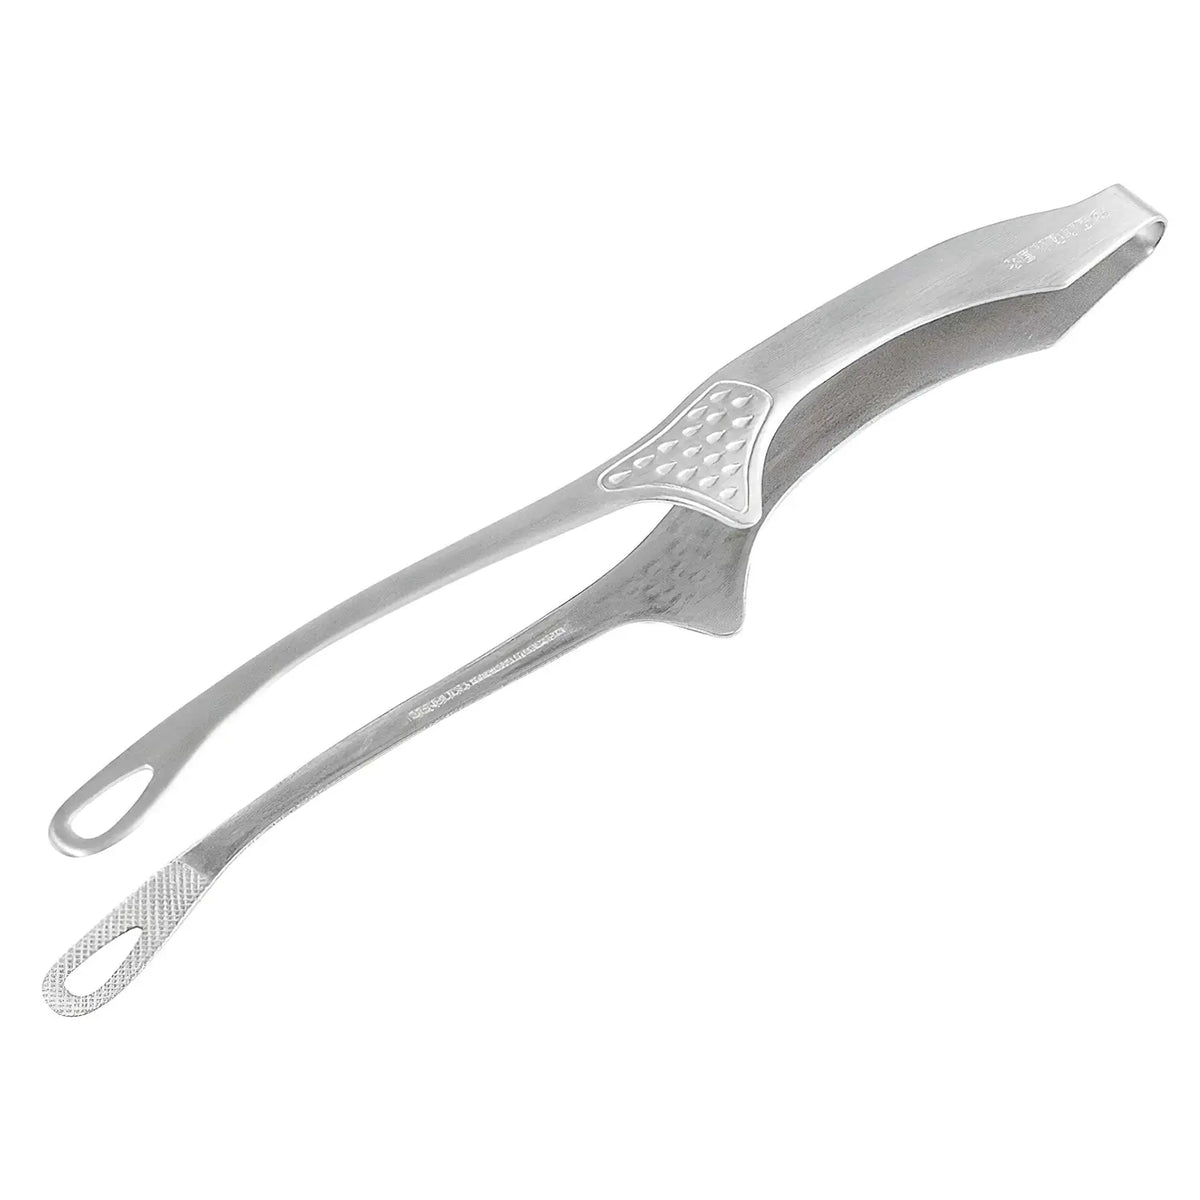 SENBUDO Stainless Steel Barbecue Tongs with Bolster